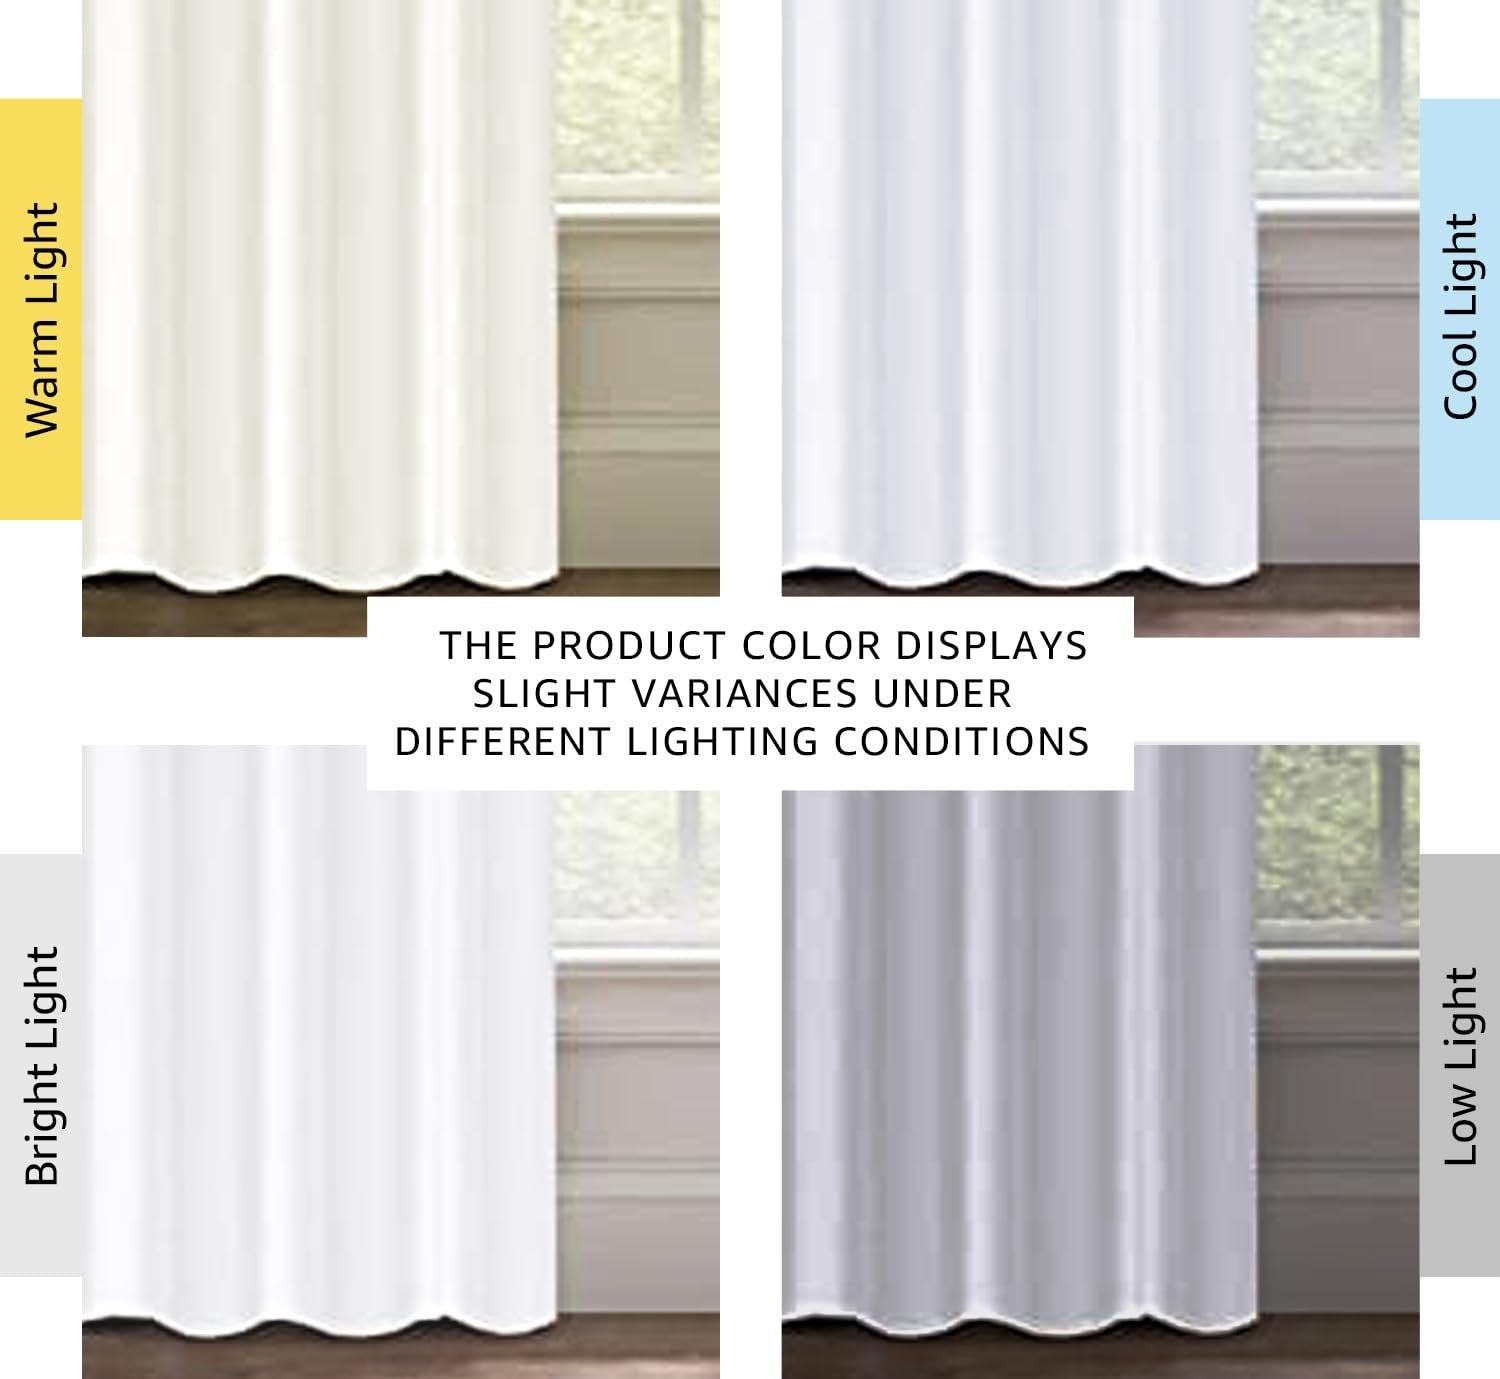 H.VERSAILTEX 100% Blackout Curtains for Bedroom Thermal Insulated Linen Textured Curtains Heat and Full Light Blocking Drapes Living Room Curtains 2 Panel Sets, 52x108 - Inch, Pure White